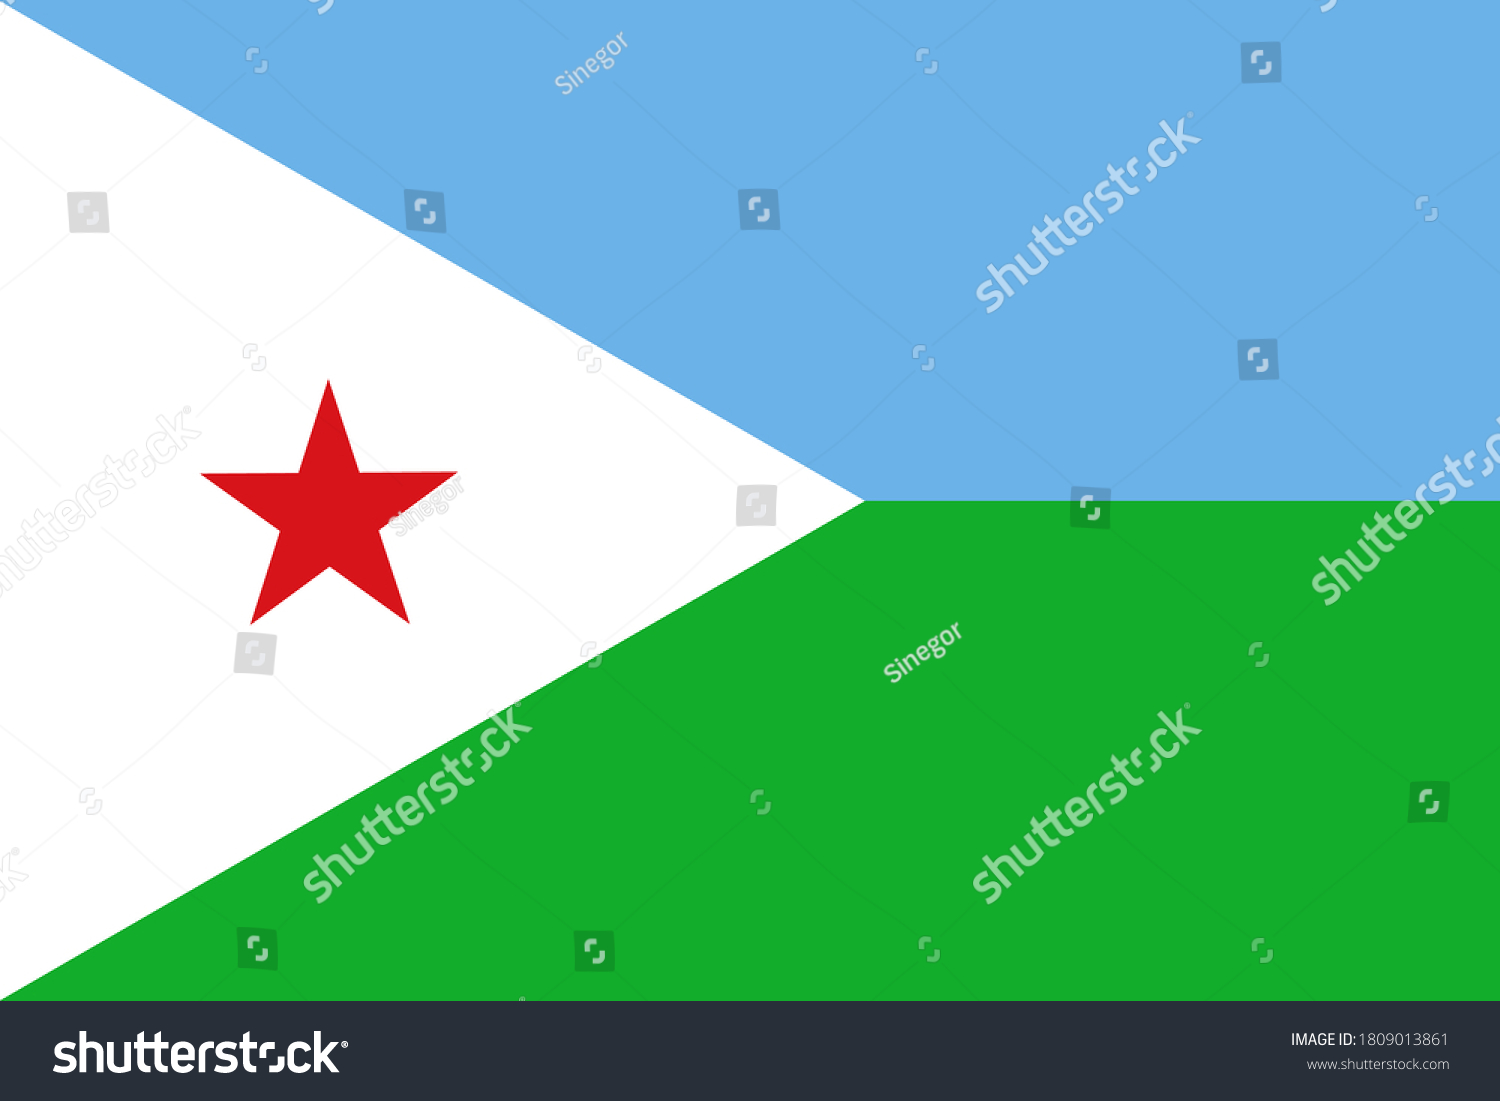 SVG of National Republic of Djibouti flag, The capital city is Djibouti. Vector illustration svg